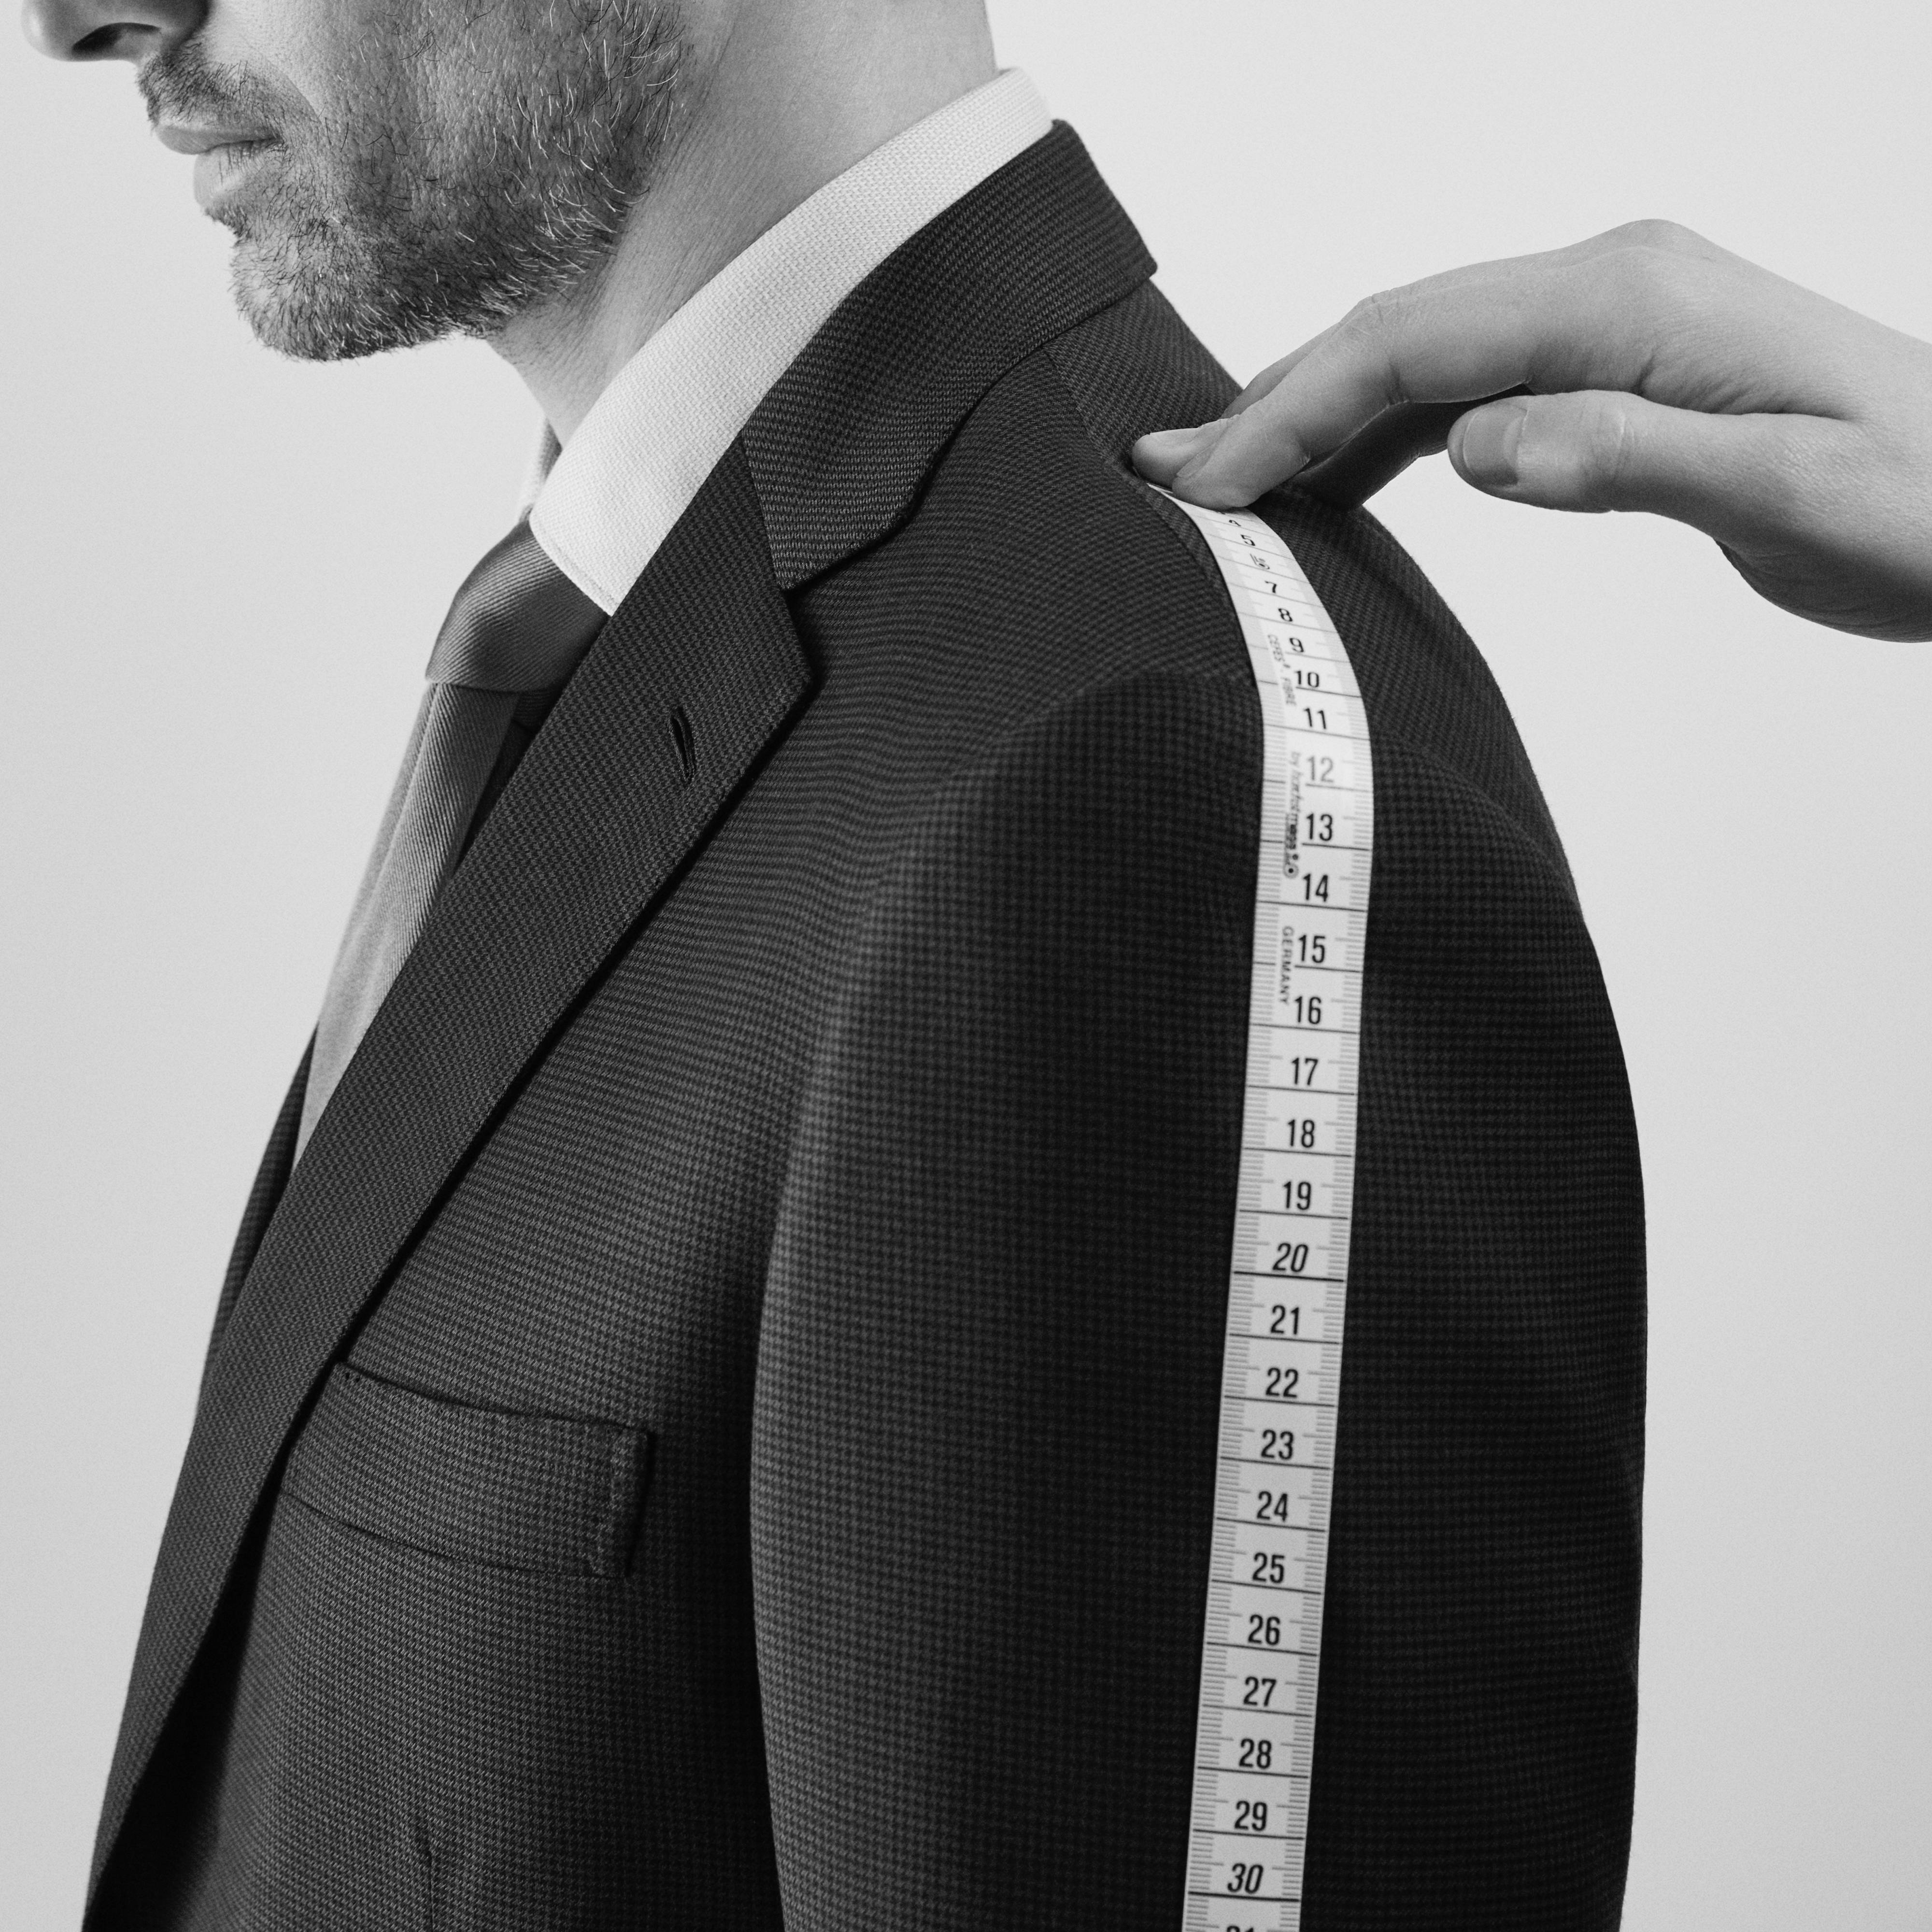 A tailor bust with a basted Brioni Bespoke jacket